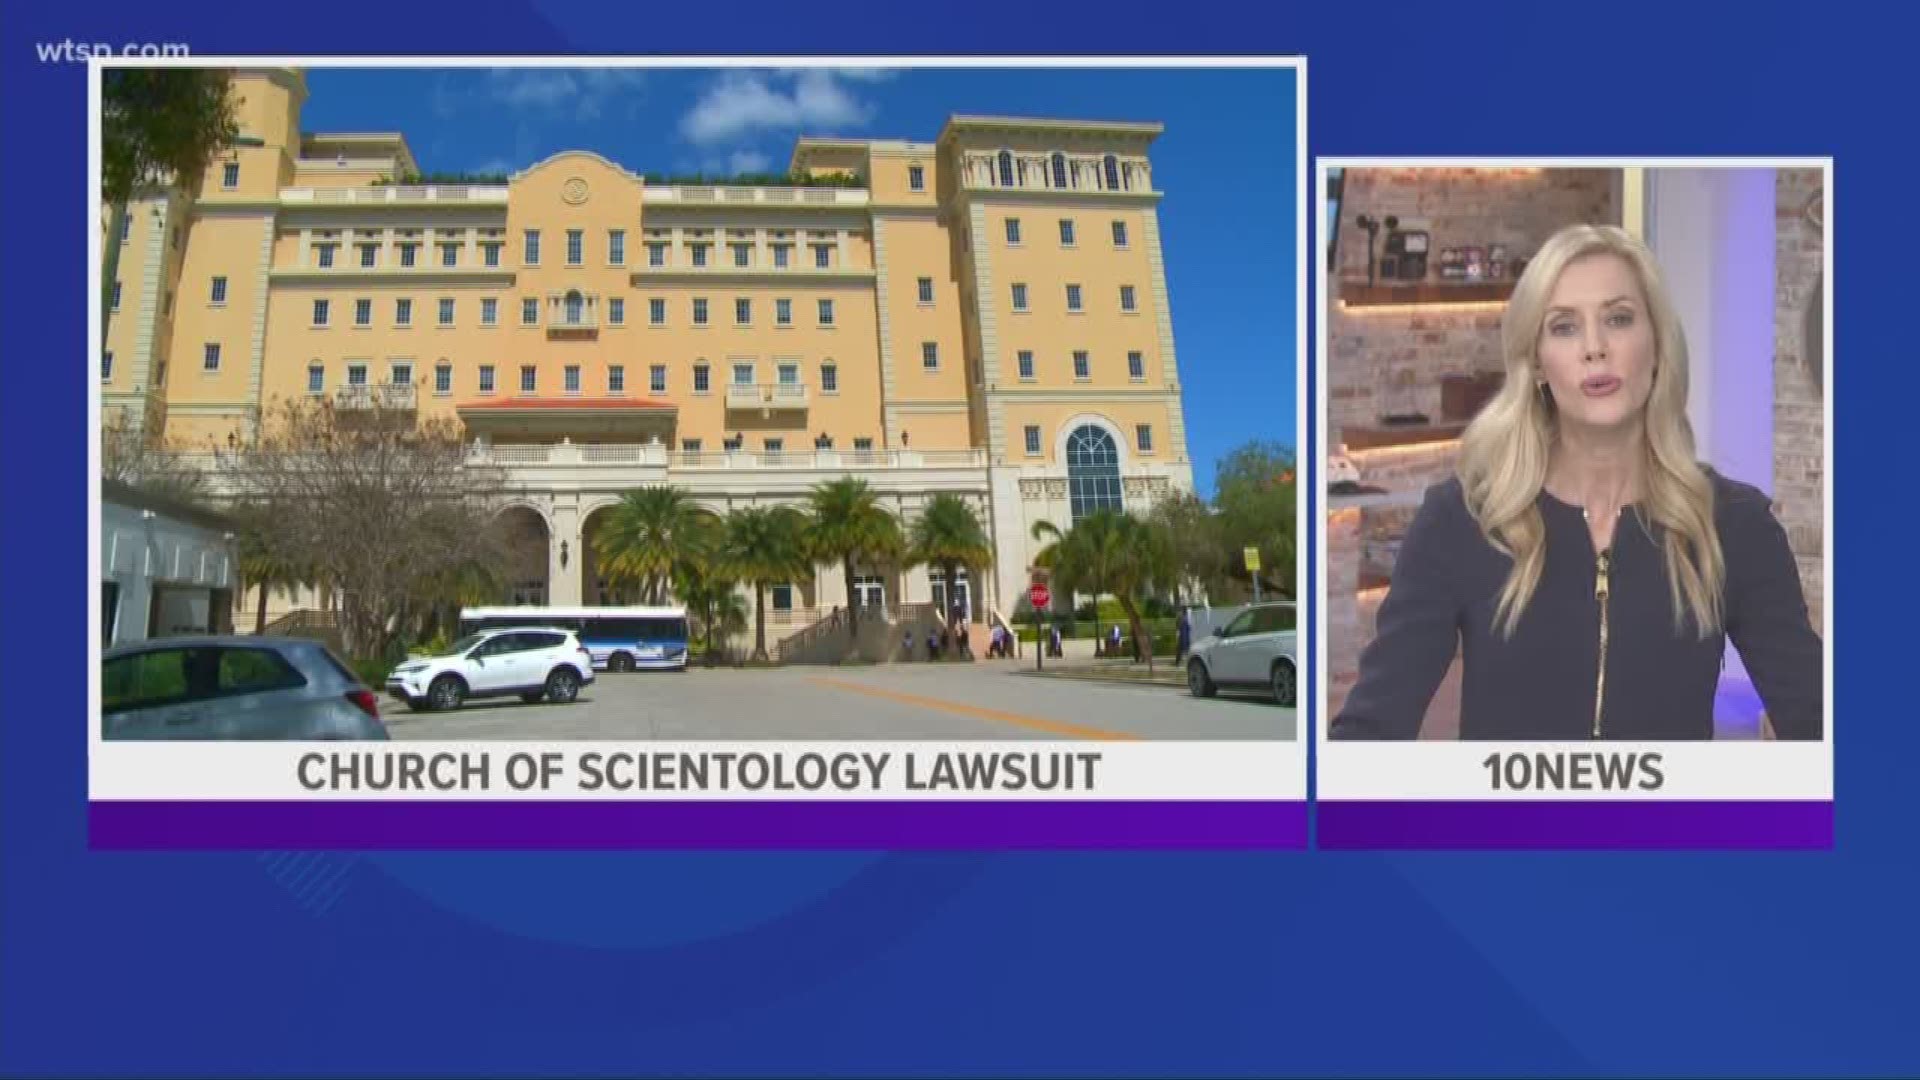 The Church of Scientology and its leader David Miscavige are the targets of a lawsuit by a former member of the church, who alleges child abuse, human trafficking and intimidation.

The lawsuit was filed Tuesday in Los Angeles. In court documents, the defendant was called Jane Doe to protect her identity.

According to the lawsuit, Doe was born to Scientologist parents in 1979 and lived from ages 6-12 at the spiritual headquarters of the church in Clearwater.

She claims she was forced to work from 8 a.m. to midnight and only instructed on Scientologist teachings. 

Doe claimed at age 10, she was subjected to a ritual called "bullbaiting," where she says she had to sit in a chair while obscene things were shouted at her. According to the lawsuit, she was expected to show no reaction; if she did, she claims the practice would start over.

The lawsuit says when she was 15, Doe was lured to Los Angeles with promises of fair pay and a simple job. Instead, she claims she was forced to work long hours for little pay.

She became a member of the Sea Org, which the suit describes as a military-like "sub-organization for Scientology's most dedicated members." The suit claims members sign a "billion-year contract" dedicating their lives to the church and work an average of 100 hours a week for $46. 

Doe said she started working as Miscavige's steward seven days a week and became close to his wife, Shelly. 

Miscavige, though, had a falling out with his wife in 2005, Doe said. That led to Doe being sent to "the hole," a pair of double-wide mobile homes where those accused of ethics violations were kept under strict surveillance, the lawsuit alleges.

She claims she was kept there for three months, then sentenced to three months of hard labor.

Doe claims she witnessed a crying Shelly Miscavige being dragged into a car. Shelly Miscavige has not been seen or heard publicly since, according to the lawsuit.

Doe said she tried to escape the church in 2016 but came back because of her family connections. She finally left for good in 2017 and now works with actress Leah Remini, who has become an outspoken critic of Scientology.

Doe's story became part of an episode of Remini's TV series "Leah Remini: Scientology and the Aftermath," which told the story of defected church members. 

The suit claims the church set up a hate website -- leahreminiaftermath.com -- that targeted Doe and the others featured on the show. The website contains what the suit calls "false, defamatory and inflammatory information about Jane Doe, all under the (Church of Scientology) copyright."

The suit claimed similar articles and videos about Doe appeared on the official website of Freedom Magazine, a Scientology-run publication.

The lawsuit seeks damages for multiple complaints, including false imprisonment; kidnapping; stalking; libel; slander; invasion of privacy; intentional infliction of emotional distress; human trafficking; failure to pay minimum wage; exceeding maximum work hours and overtime, failure to provide days of rest and meal periods; violation of California labor codes; fraudulent inducement of employment; negligent misrepresentation; and negligence.

“Scientology for decades has sought to quash dissention, cover up its long history of physical, emotional, and sexual abuse of its members, including its most vulnerable members, its children, and weaponize its doctrine against those who escape and find the courage to speak up," said Attorney Brian Kent of Laffey, Bucci & Kent, LLP, which filed the lawsuit. "This is just the beginning and we are not going to stop until they do.”

In response to the lawsuit, a spokesperson for the Church of Scientology said the lawsuit was filled with nothing more than unfounded allegations. The spokesperson said Jane Doe's complaint was littered with "anti-religious slurs culled from the tabloids" and accusations that have already been disproven in courts.

"We are confident the lawsuit will fail," the Church of Scientology wrote in an email. "Federal courts have already determined that service in the Church of Scientology’s religious order is voluntary and protected by the First Amendment.  Moreover, the evidence will establish that while serving the Church, Plaintiff came and went freely, traveled the world, and lived in comfortable surroundings.  The Church will vigorously defend itself against these unfounded allegations."